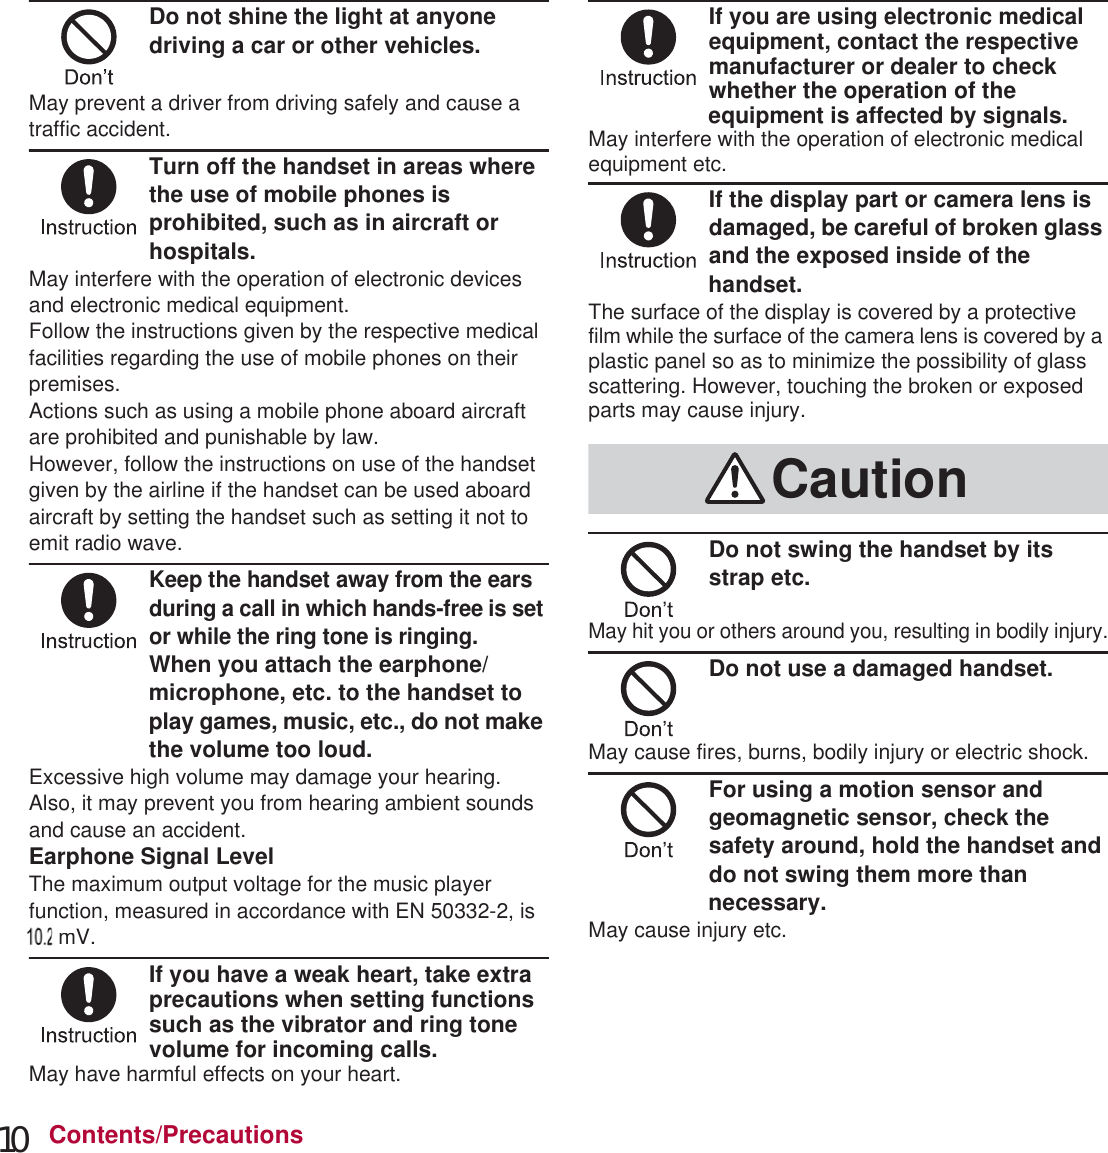 10 Contents/PrecautionsDo not shine the light at anyone driving a car or other vehicles.May prevent a driver from driving safely and cause a traffic accident.Turn off the handset in areas where the use of mobile phones is prohibited, such as in aircraft or hospitals.May interfere with the operation of electronic devices and electronic medical equipment.Follow the instructions given by the respective medical facilities regarding the use of mobile phones on their premises.Actions such as using a mobile phone aboard aircraft are prohibited and punishable by law.However, follow the instructions on use of the handset given by the airline if the handset can be used aboard aircraft by setting the handset such as setting it not to emit radio wave.Keep the handset away from the ears during a call in which hands-free is set or while the ring tone is ringing.When you attach the earphone/microphone, etc. to the handset to play games, music, etc., do not make the volume too loud.Excessive high volume may damage your hearing.Also, it may prevent you from hearing ambient sounds and cause an accident.Earphone Signal LevelThe maximum output voltage for the music player function, measured in accordance with EN 50332-2, is 50 mV.If you have a weak heart, take extra precautions when setting functions such as the vibrator and ring tone volume for incoming calls.May have harmful effects on your heart.If you are using electronic medical equipment, contact the respective manufacturer or dealer to check whether the operation of the equipment is affected by signals.May interfere with the operation of electronic medical equipment etc.If the display part or camera lens is damaged, be careful of broken glass and the exposed inside of the handset.The surface of the display is covered by a protective film while the surface of the camera lens is covered by a plastic panel so as to minimize the possibility of glass scattering. However, touching the broken or exposed parts may cause injury.Do not swing the handset by its strap etc.May hit you or others around you, resulting in bodily injury.Do not use a damaged handset.May cause fires, burns, bodily injury or electric shock.For using a motion sensor and geomagnetic sensor, check the safety around, hold the handset and do not swing them more than necessary.May cause injury etc.Caution000000 mV.